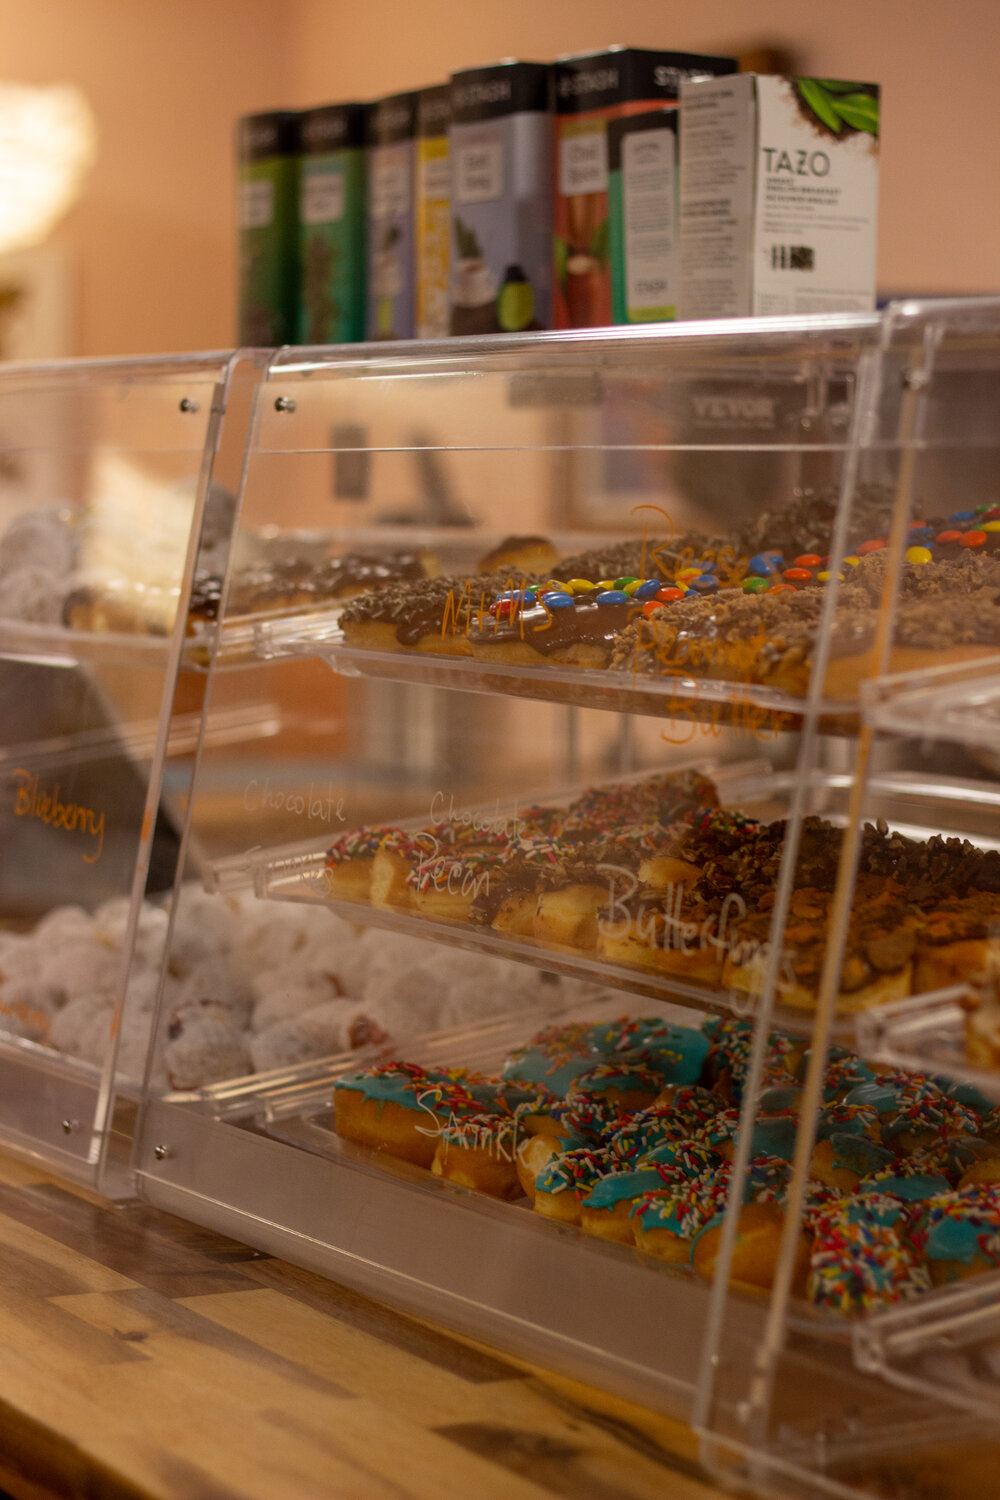 The shop serves mini-doughnuts, doughnut holes, and bars, which span from candy toppings to classic maple or Bavarian cream.